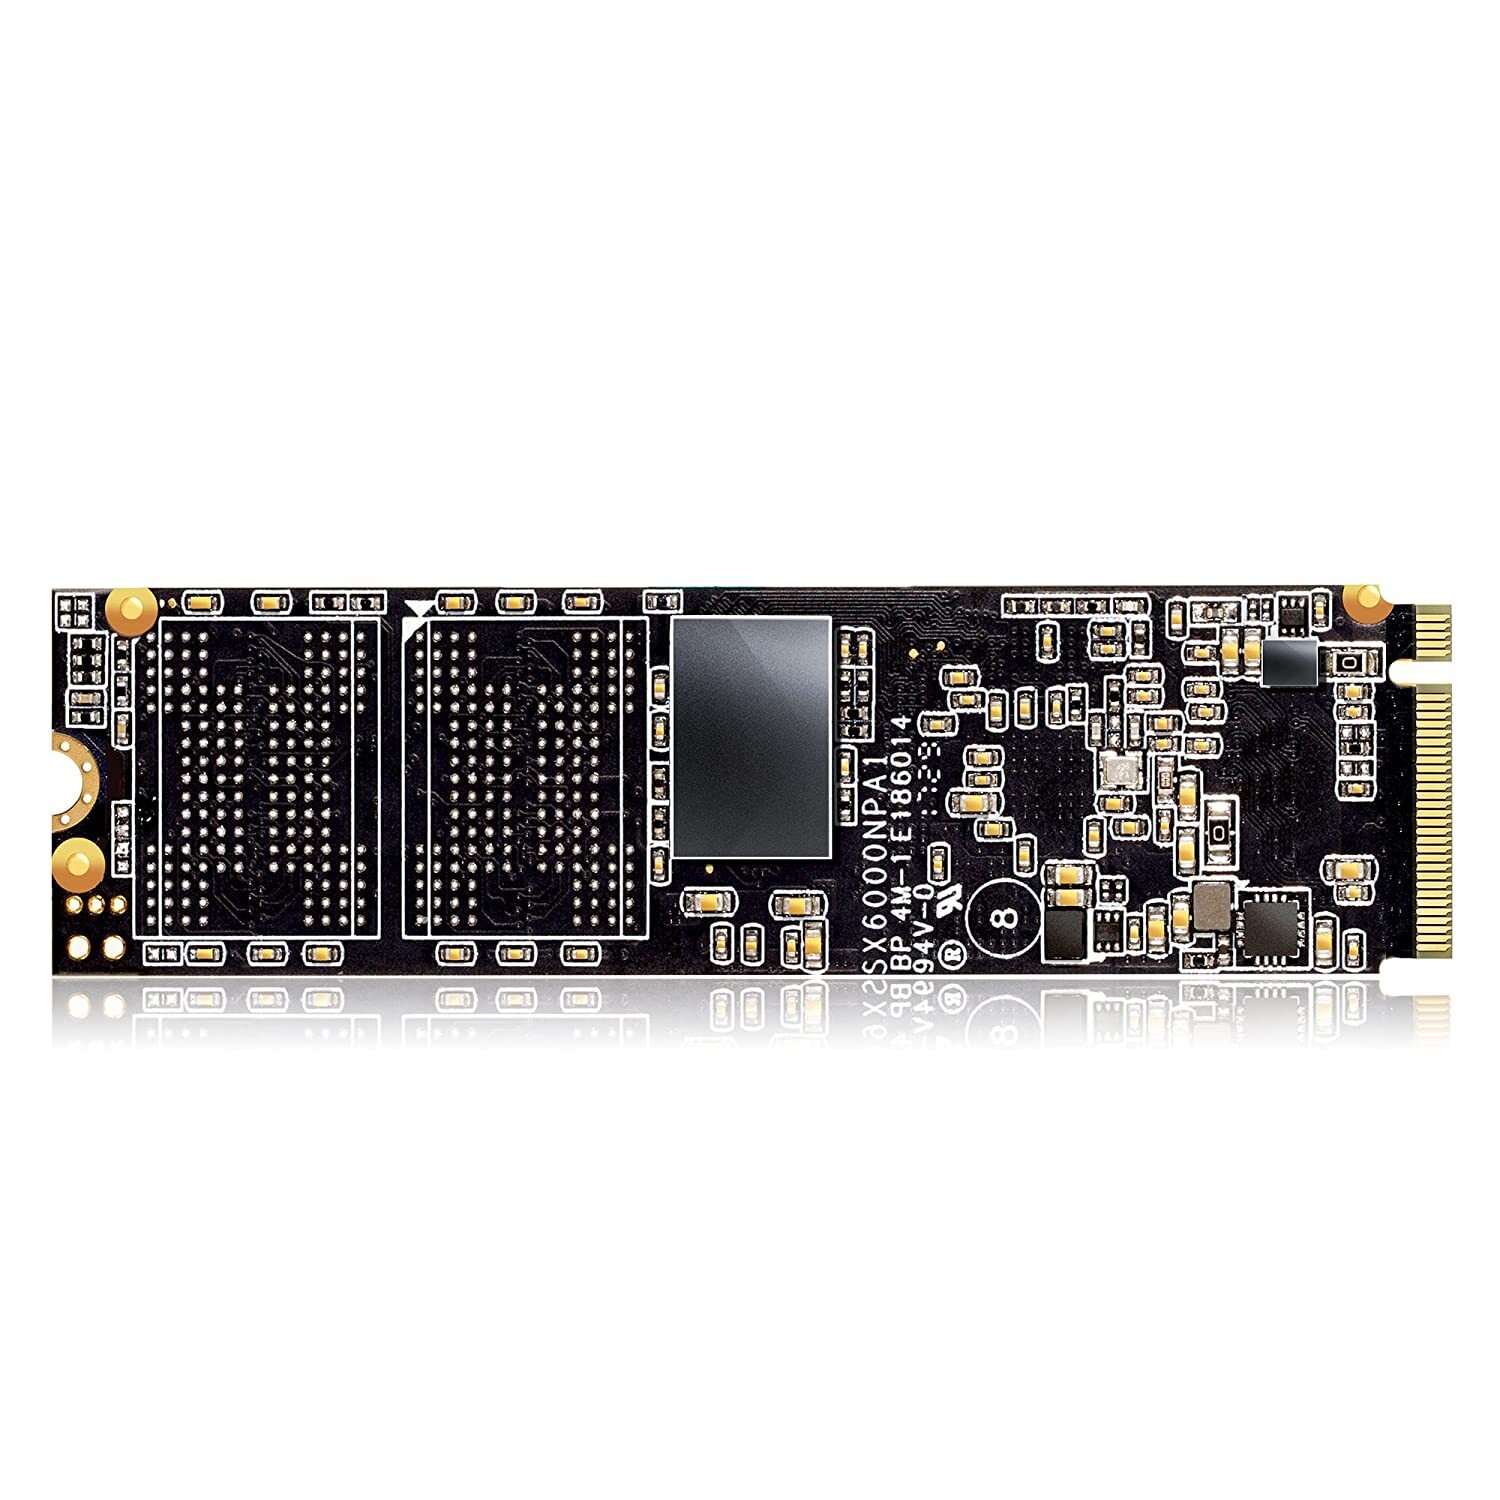 XPG SX6000 PCIe 128GB 3D NAND PCIe Gen3x2 M.2 2280 NVMe 1.2 R/W up to 1000/800MB/s Solid State Drive (ASX6000NP 128GT C)